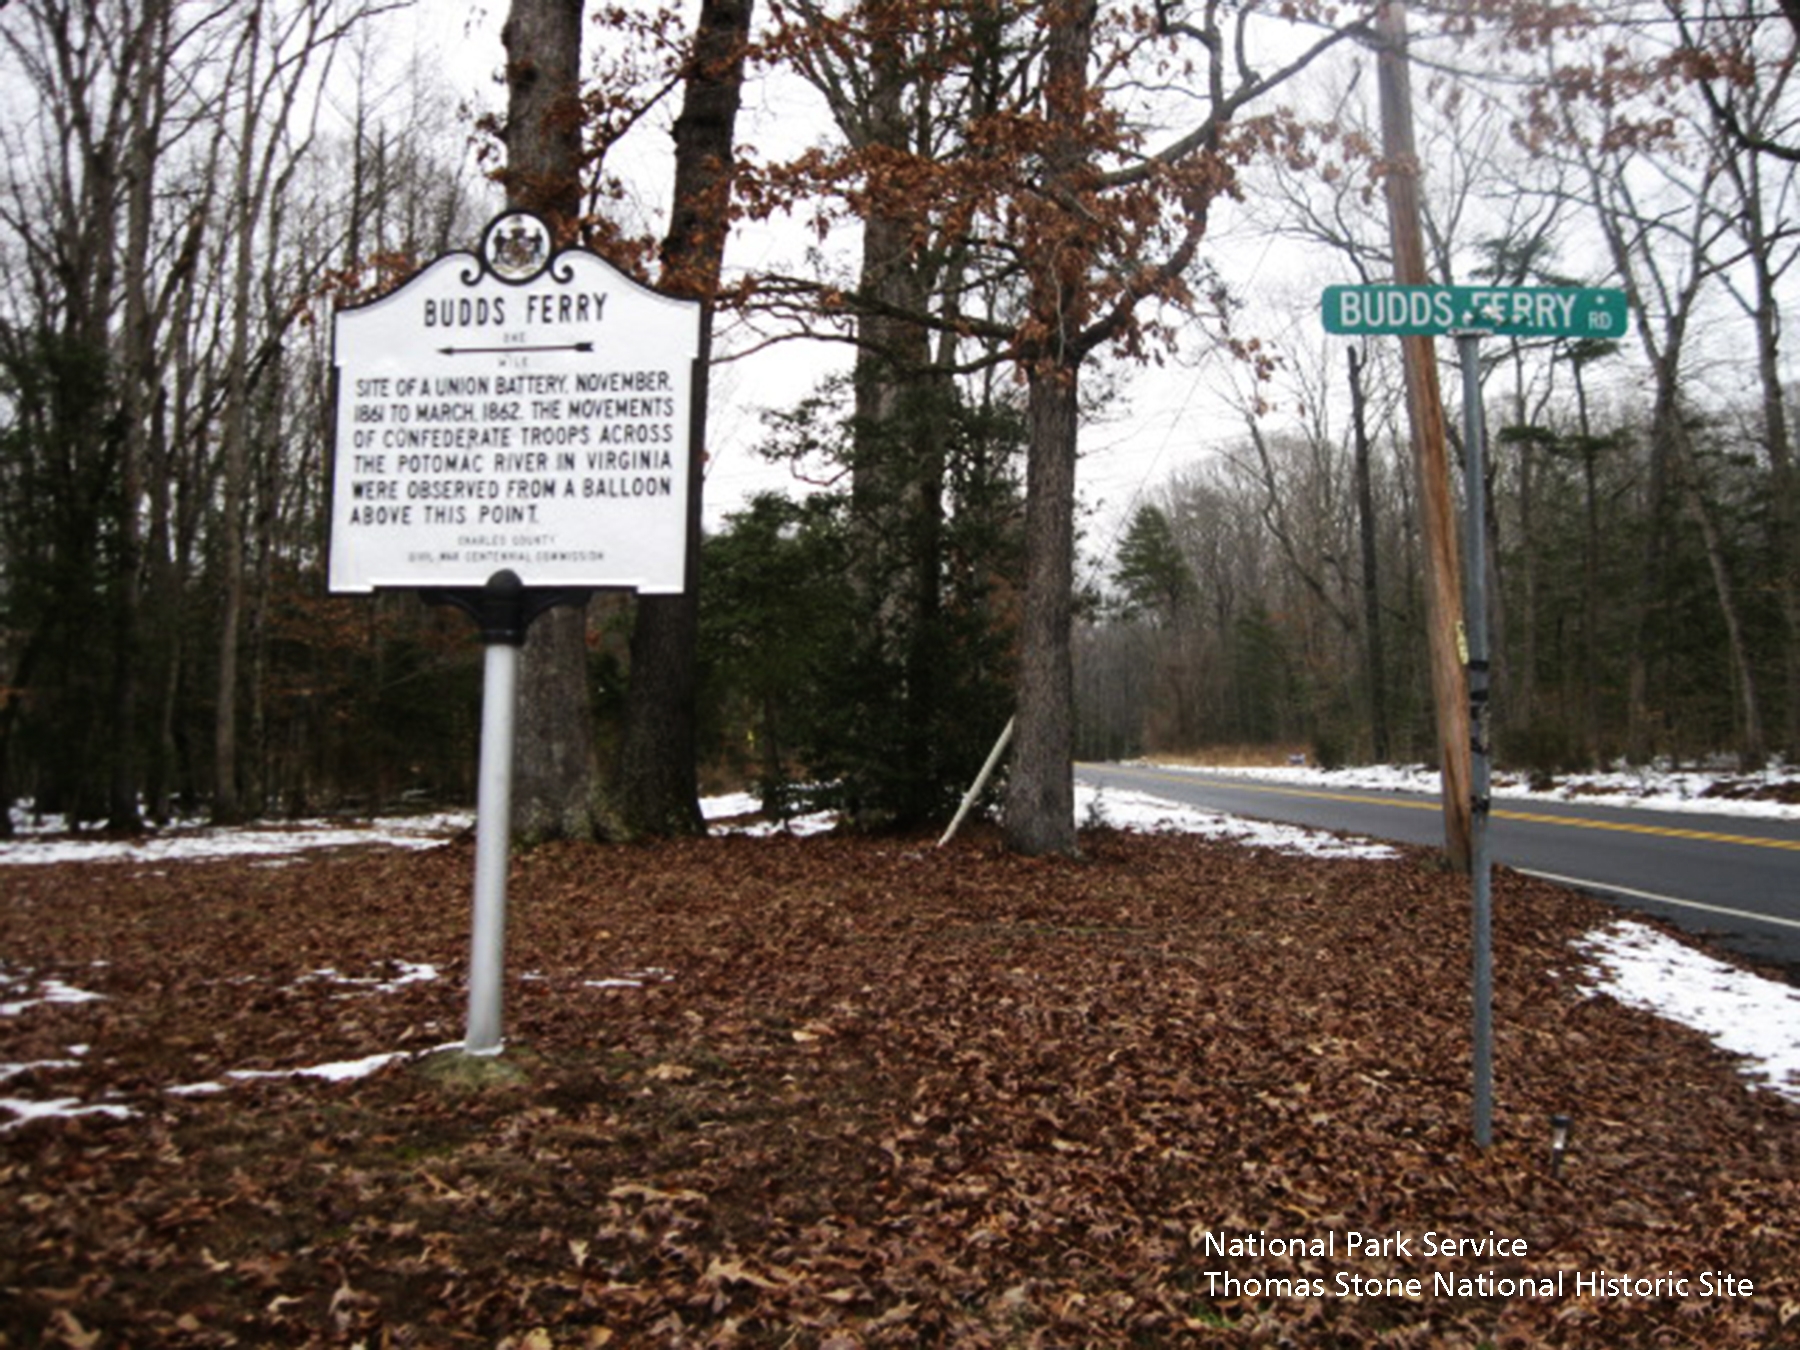 Budds Ferry Marker and Budds Ferry Road Sign